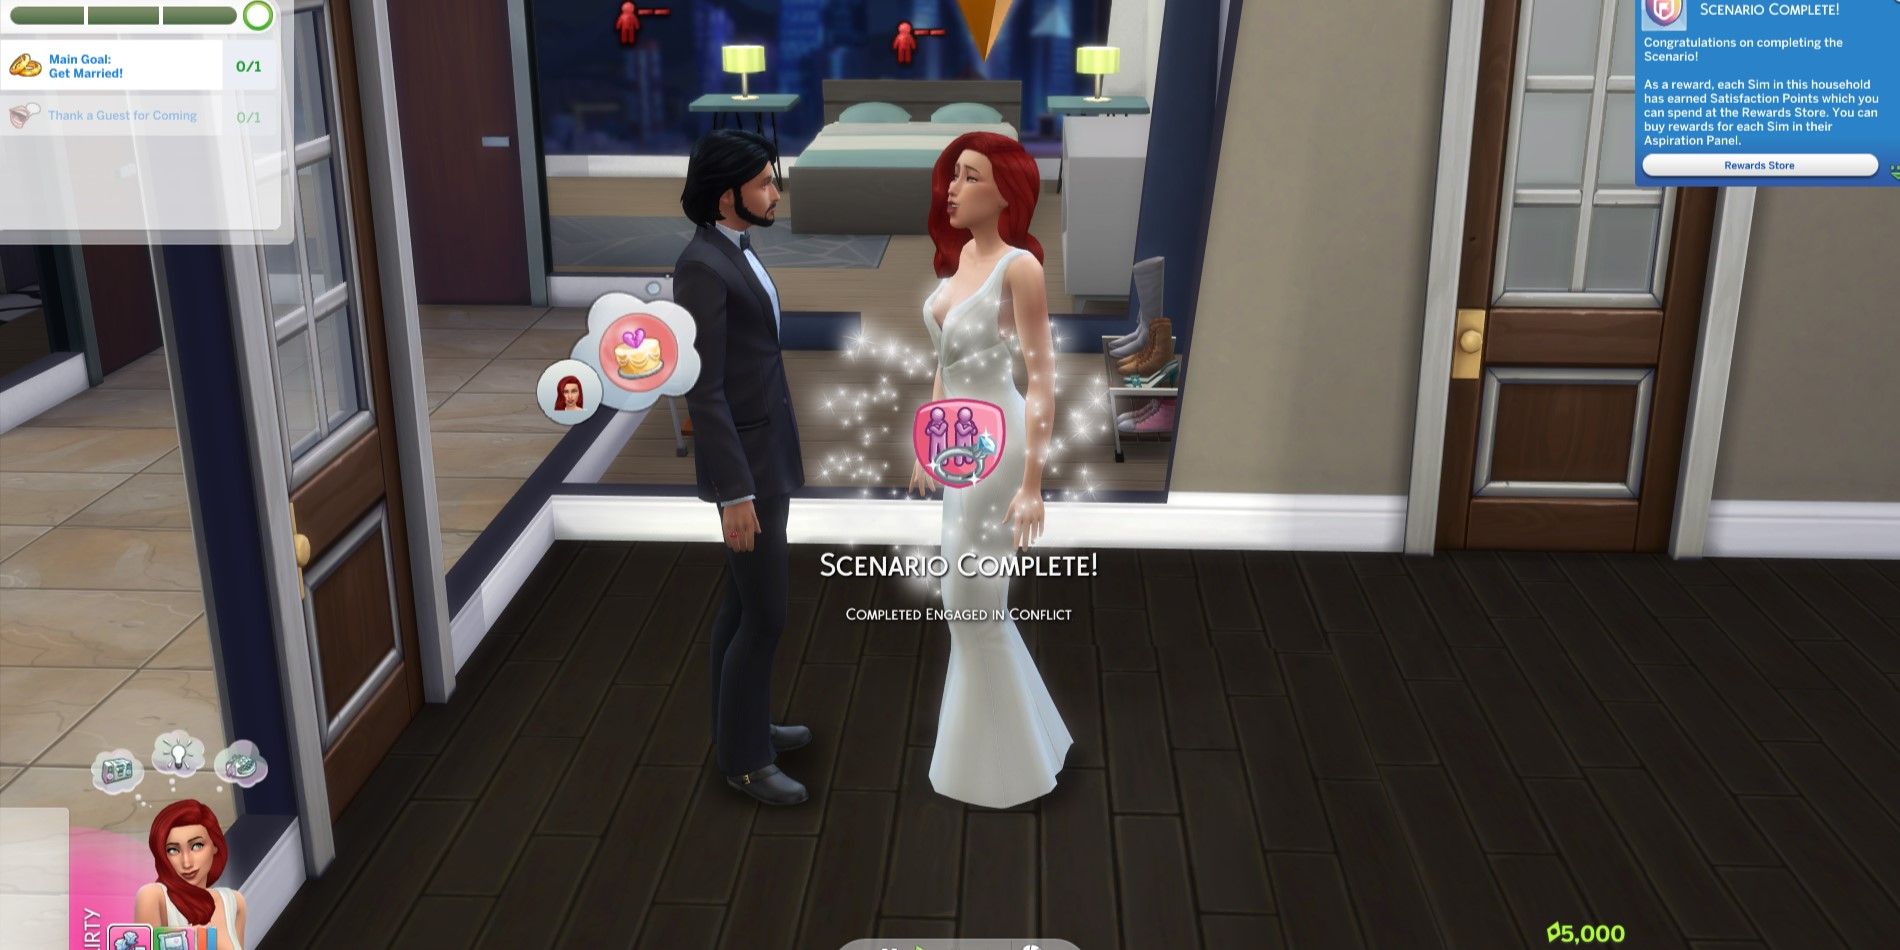 The Sims 4 character called off the wedding to complete the Engaged In Conflict scenario and received 5,000 Satisfaction Points.